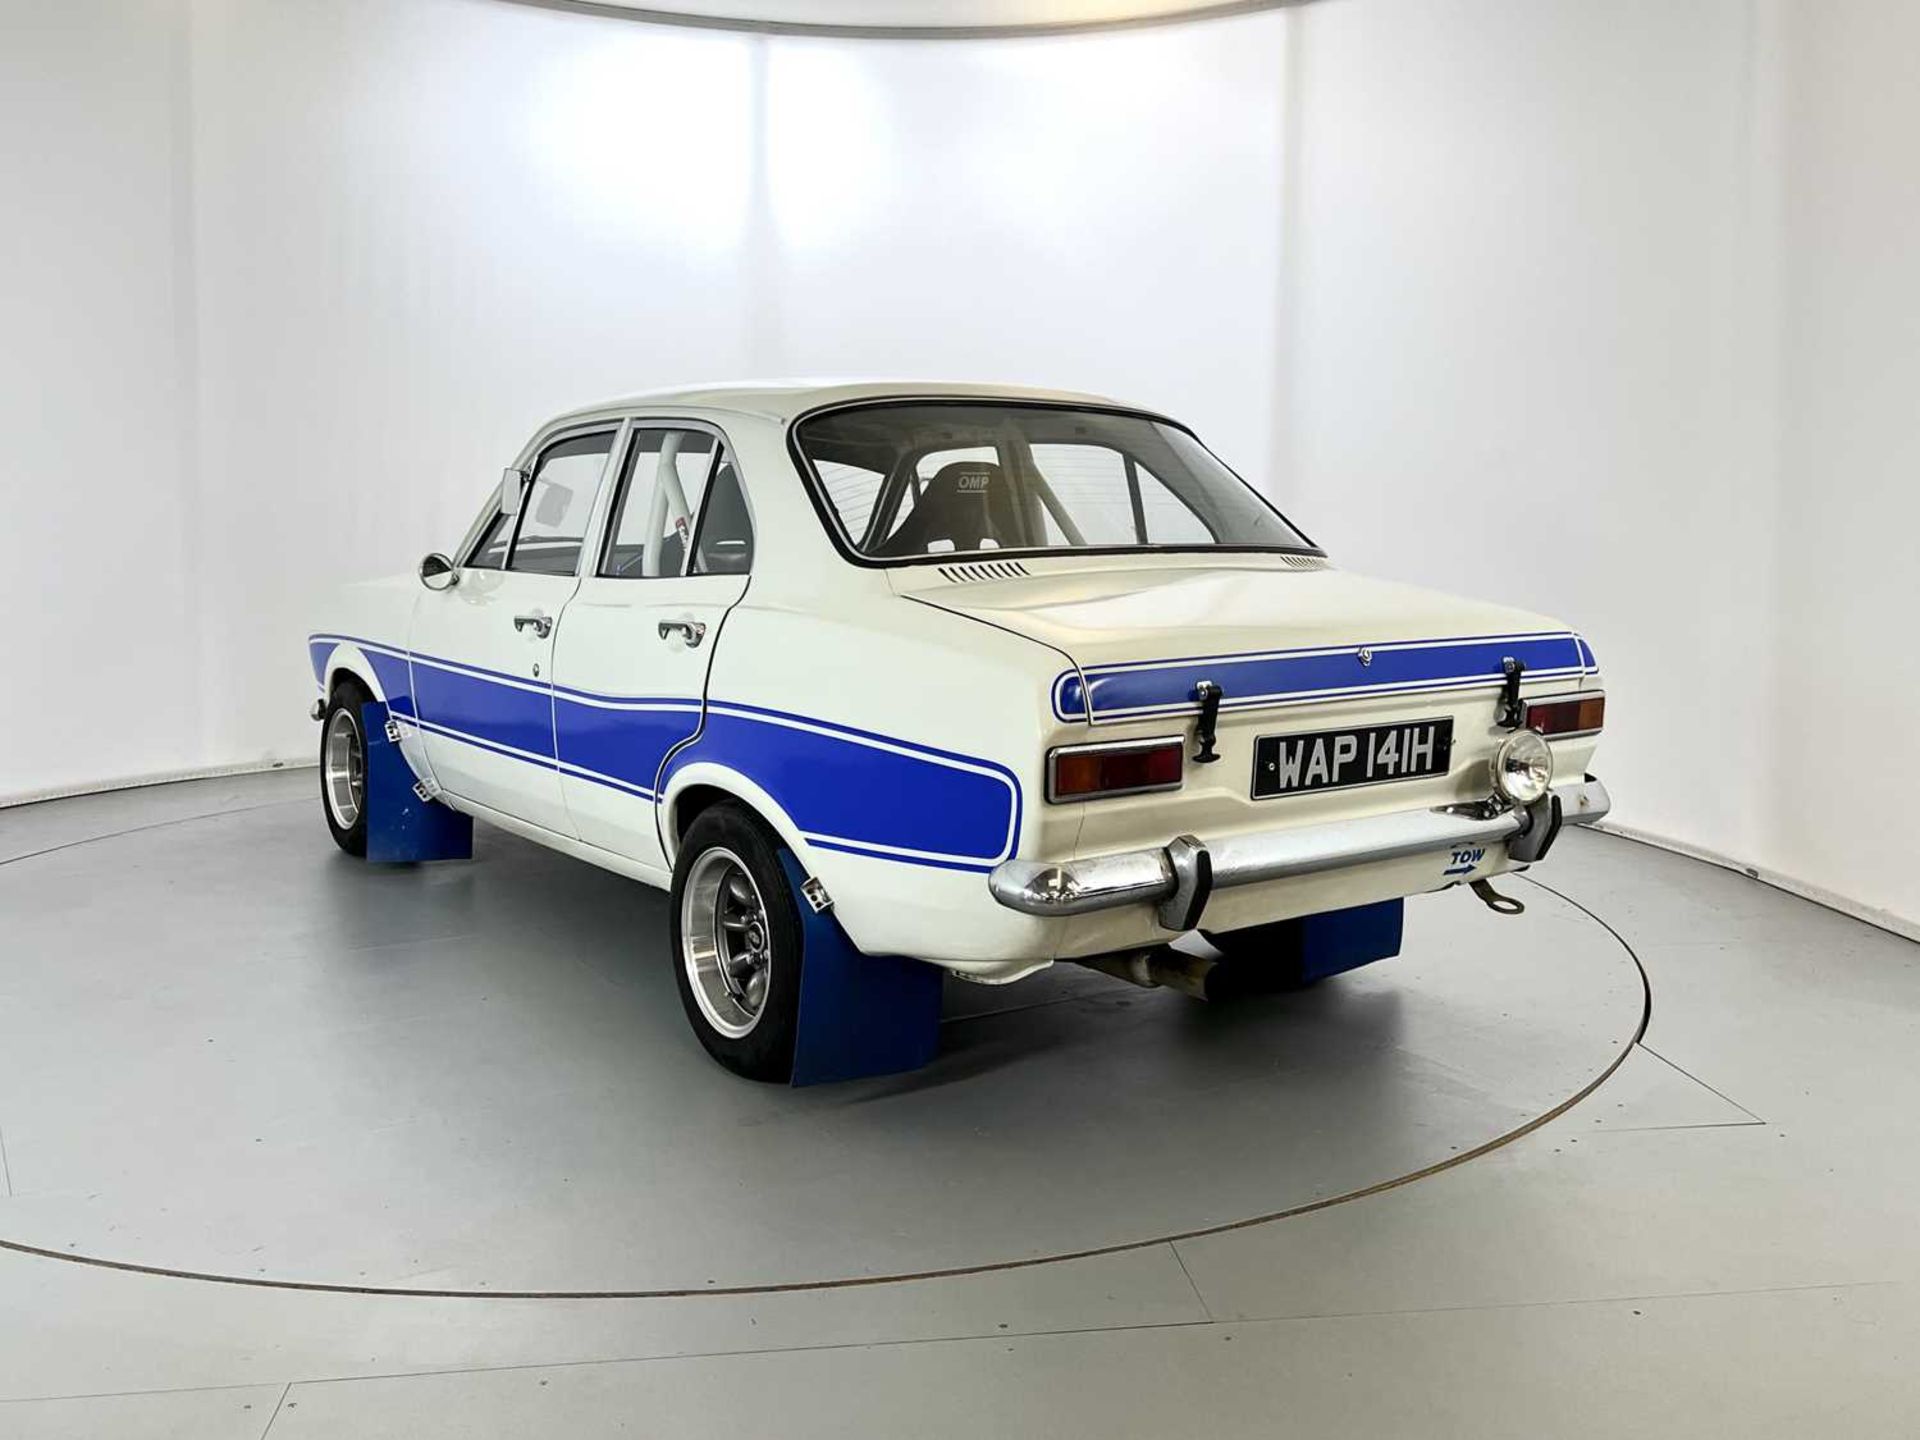 1970 Ford Escort - Image 7 of 30